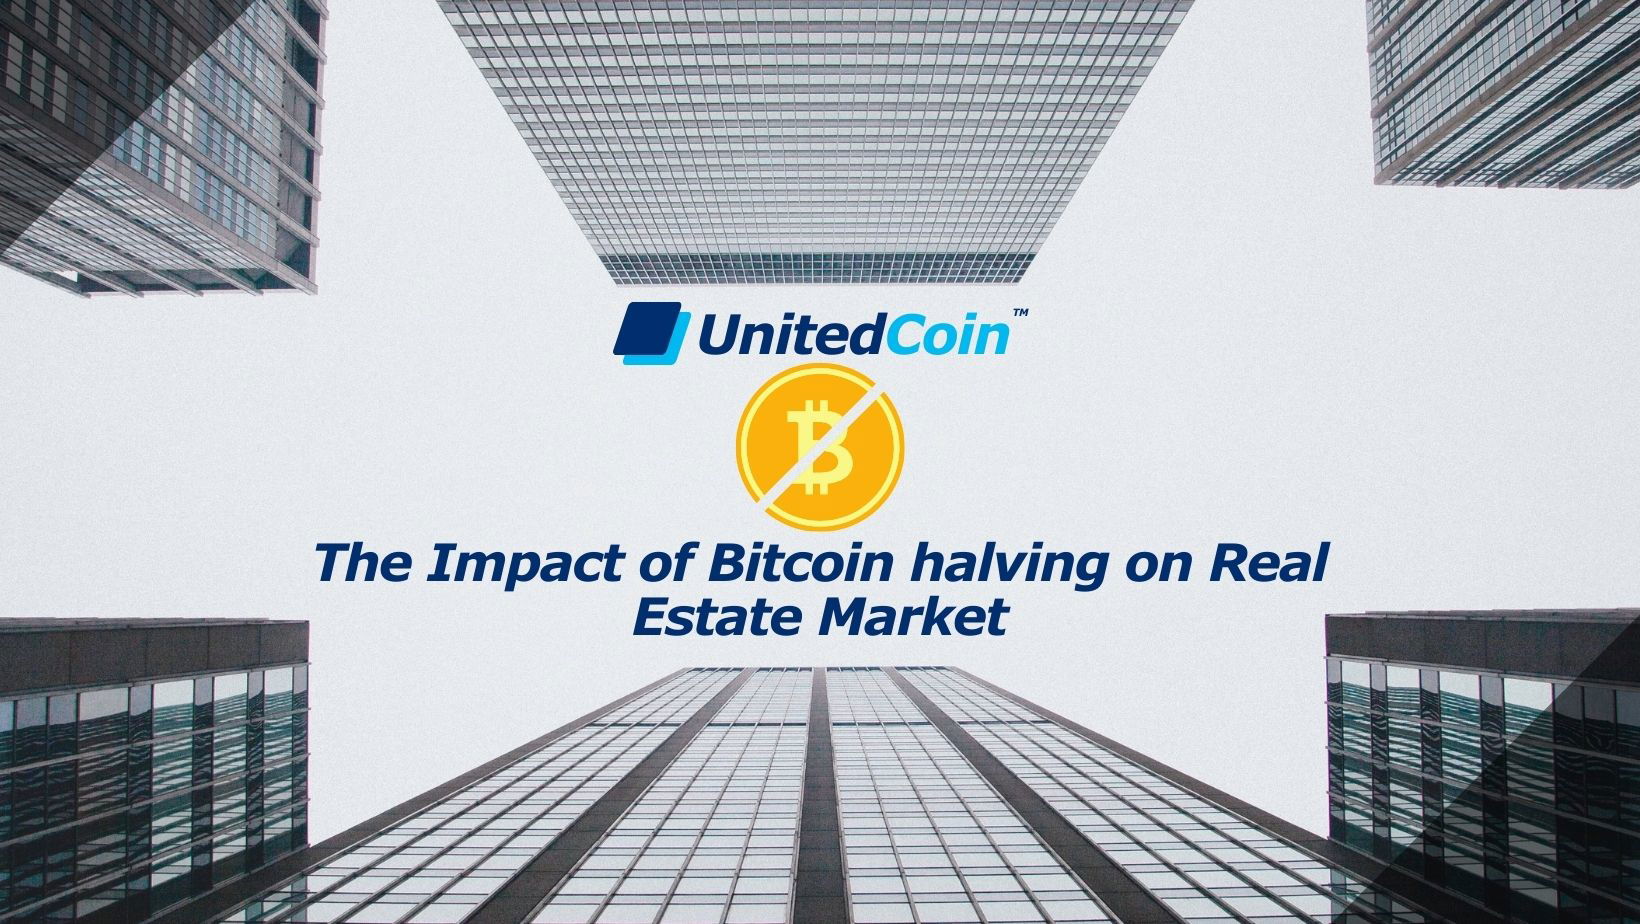 The Impact of Bitcoin halving on Real Estate Market